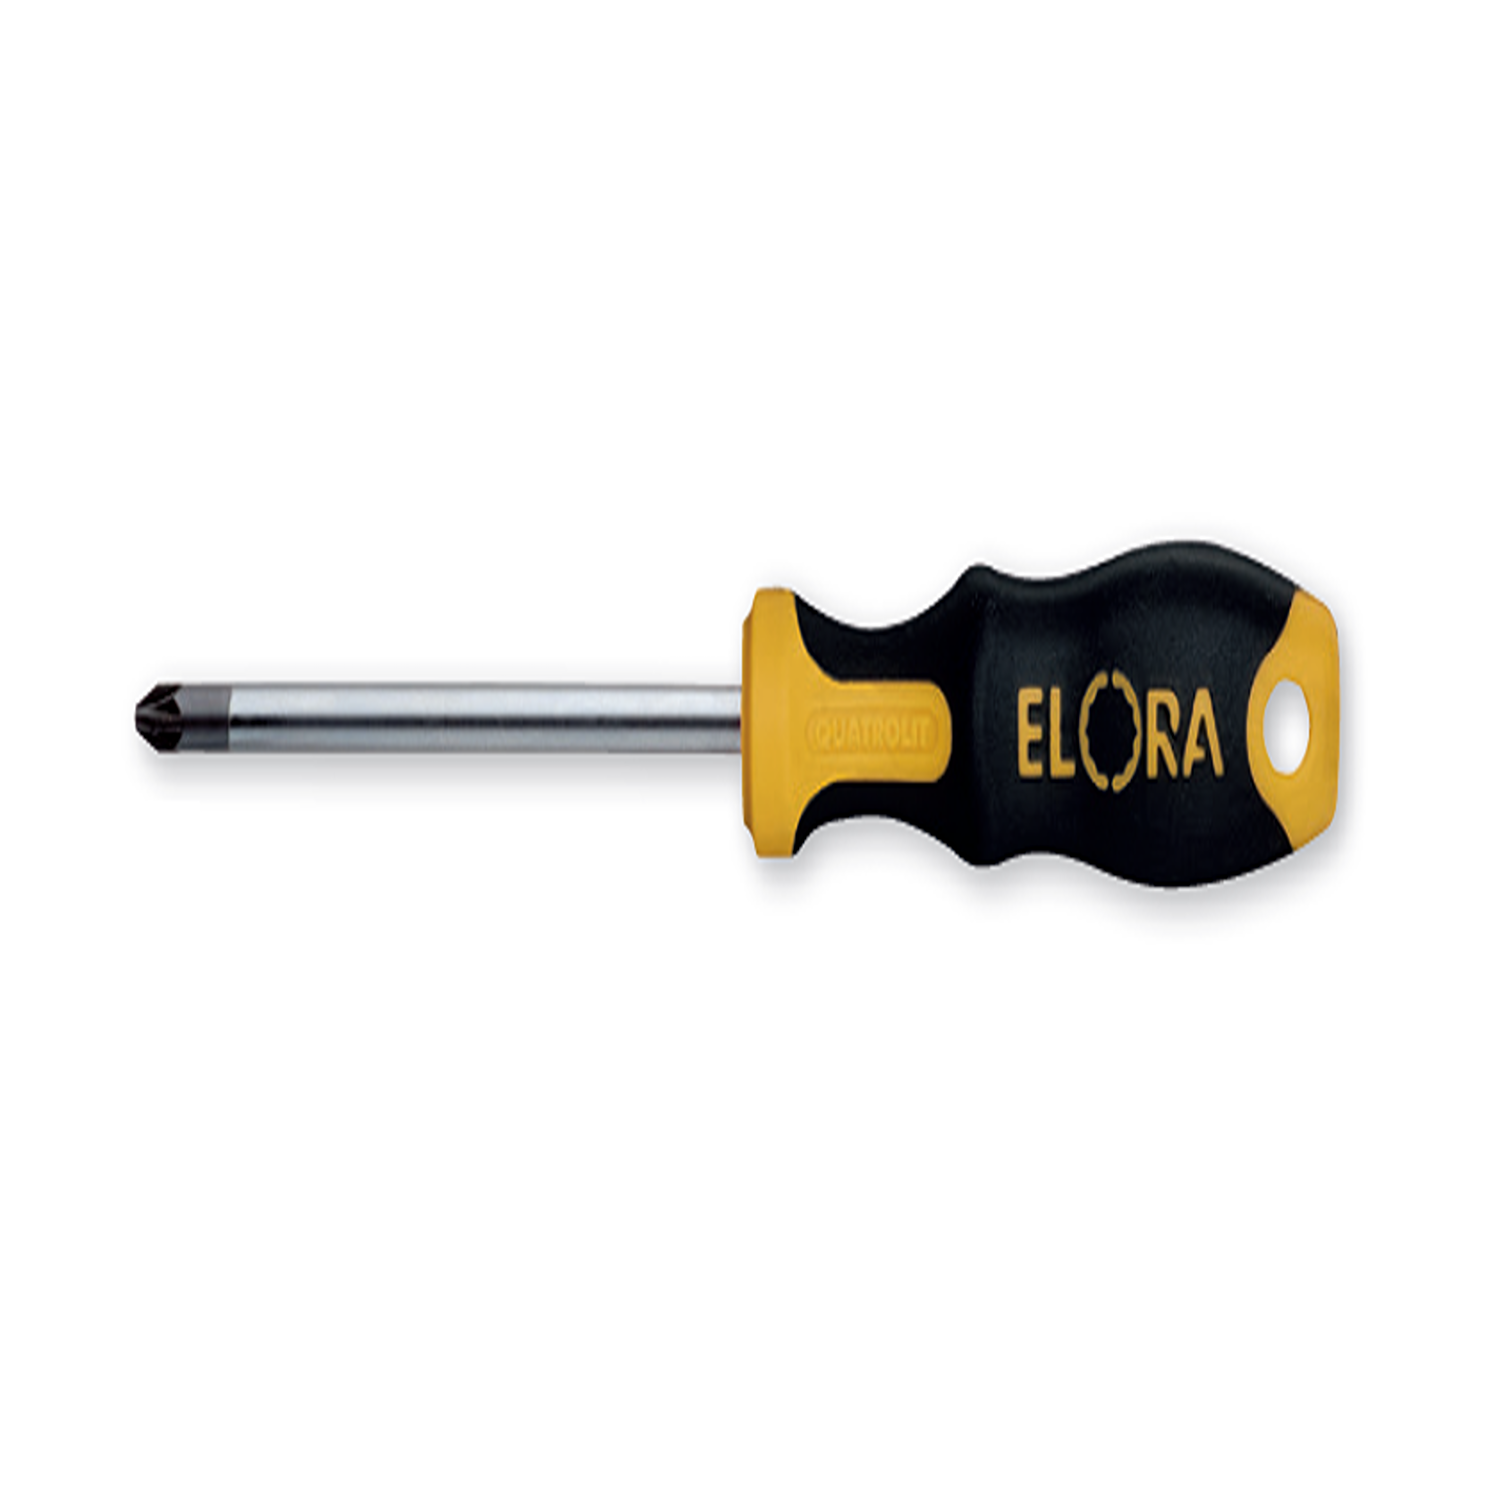 ELORA 549-PZ Screwdriver for Cross Slotted Screws (ELORA Tools) - Premium Screwdriver from ELORA - Shop now at Yew Aik.